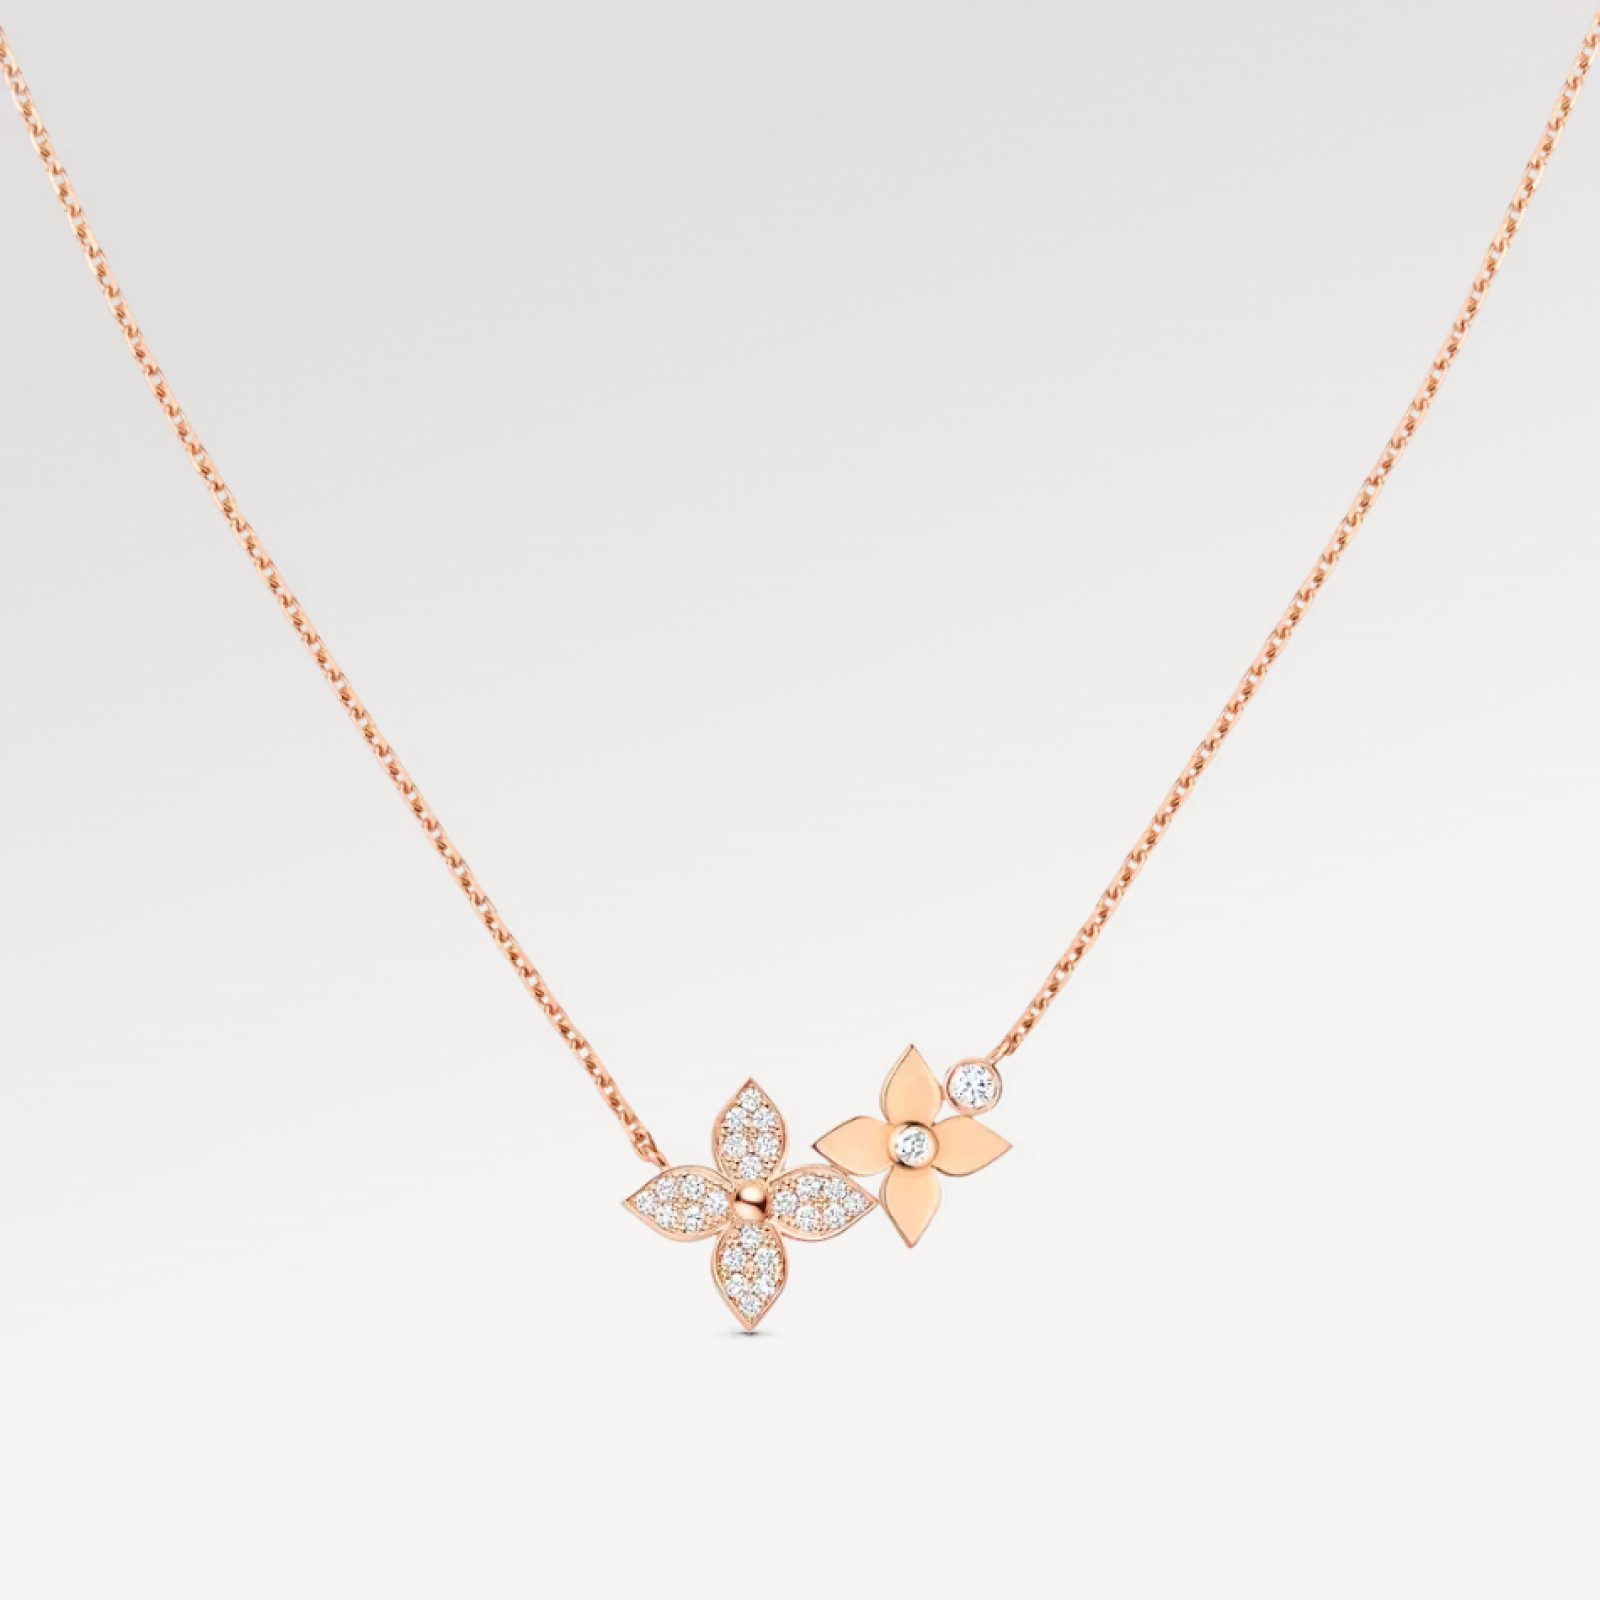 Idylle Blossom Necklace, Pink Gold and Diamonds